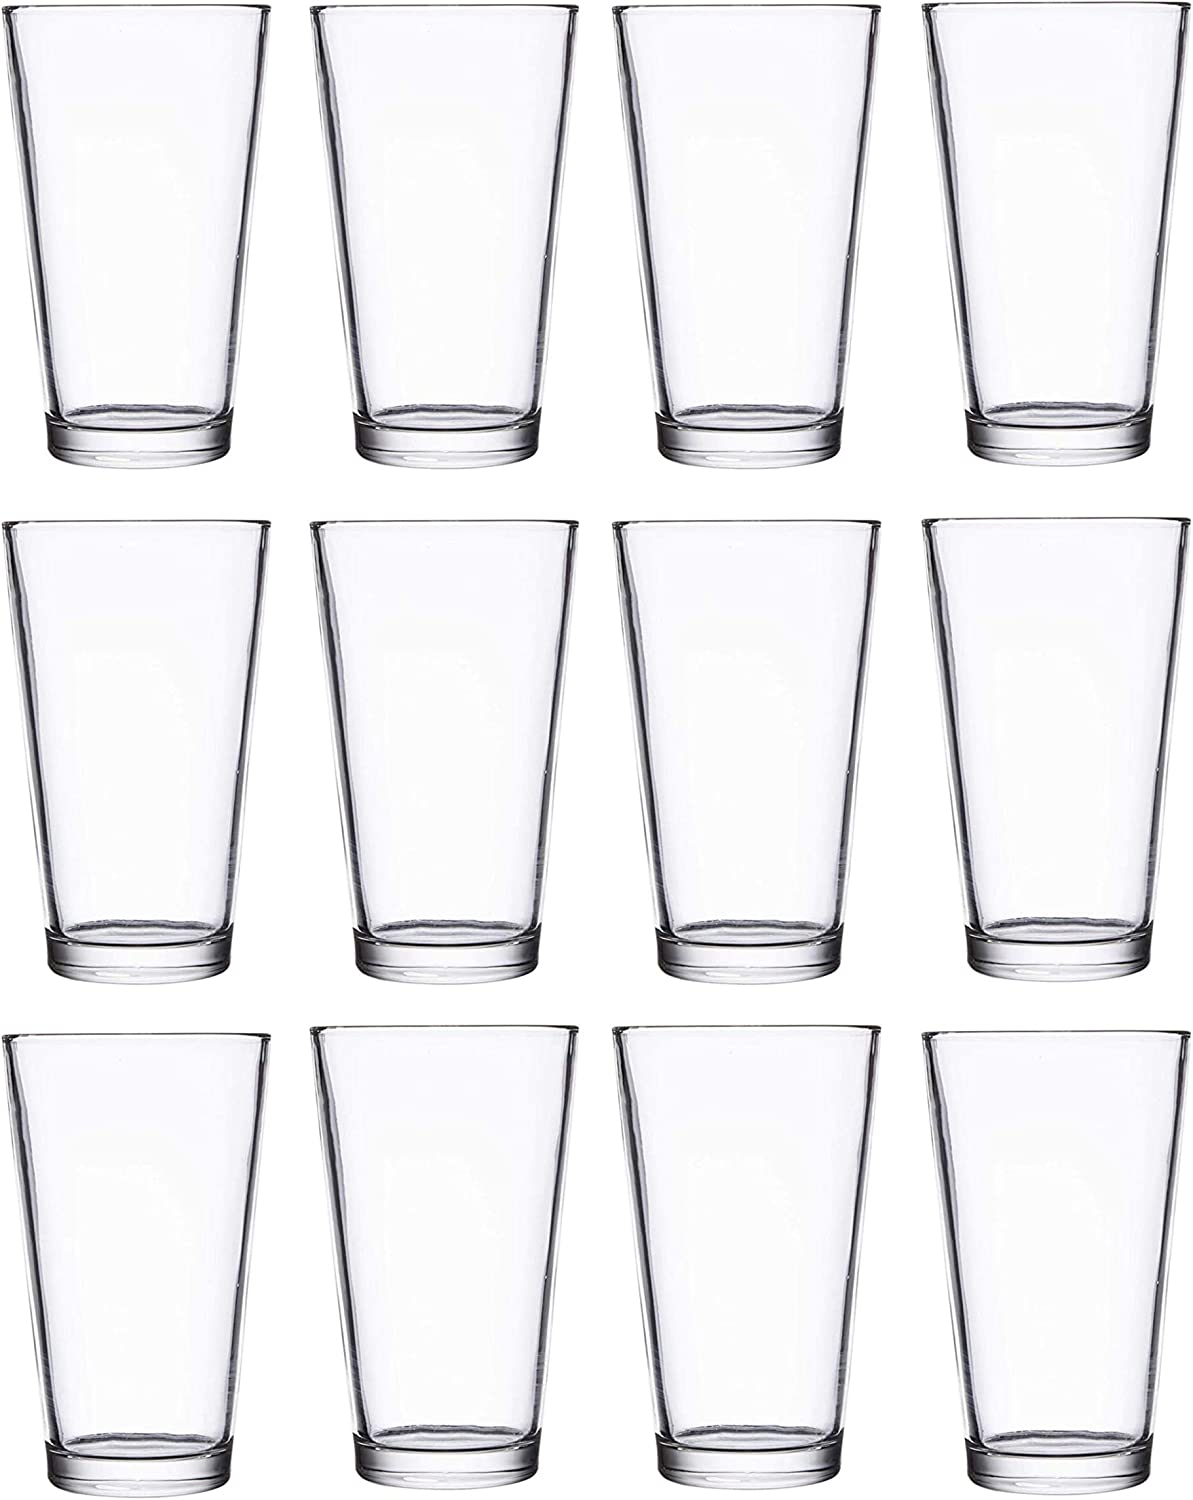 Beer Pint Glass - Classic Beer Glasses Pint, 16 Ounce Set of 6